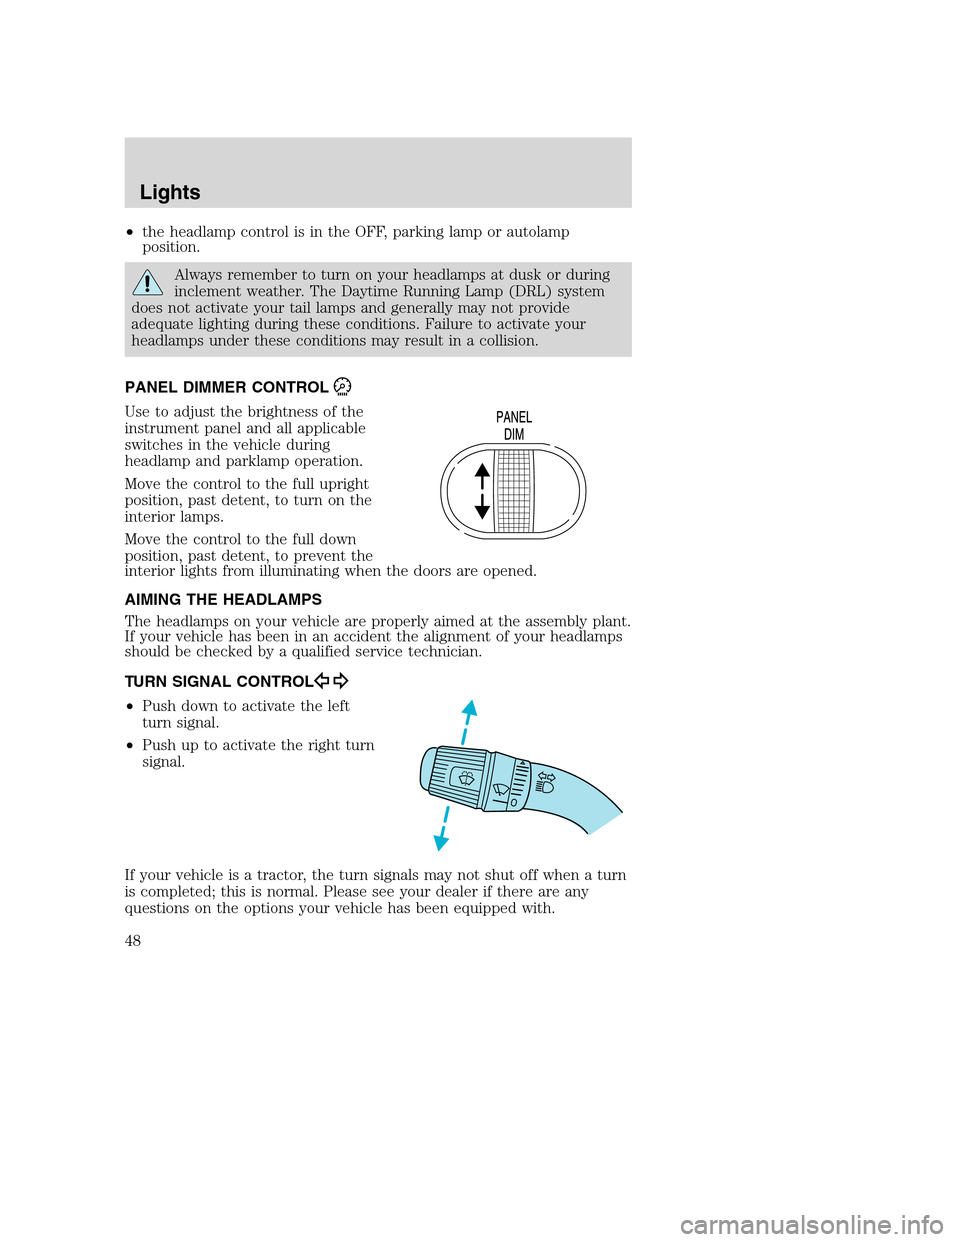 FORD F750 2005 11.G Service Manual •the headlamp control is in the OFF, parking lamp or autolamp
position.
Always remember to turn on your headlamps at dusk or during
inclement weather. The Daytime Running Lamp (DRL) system
does not 